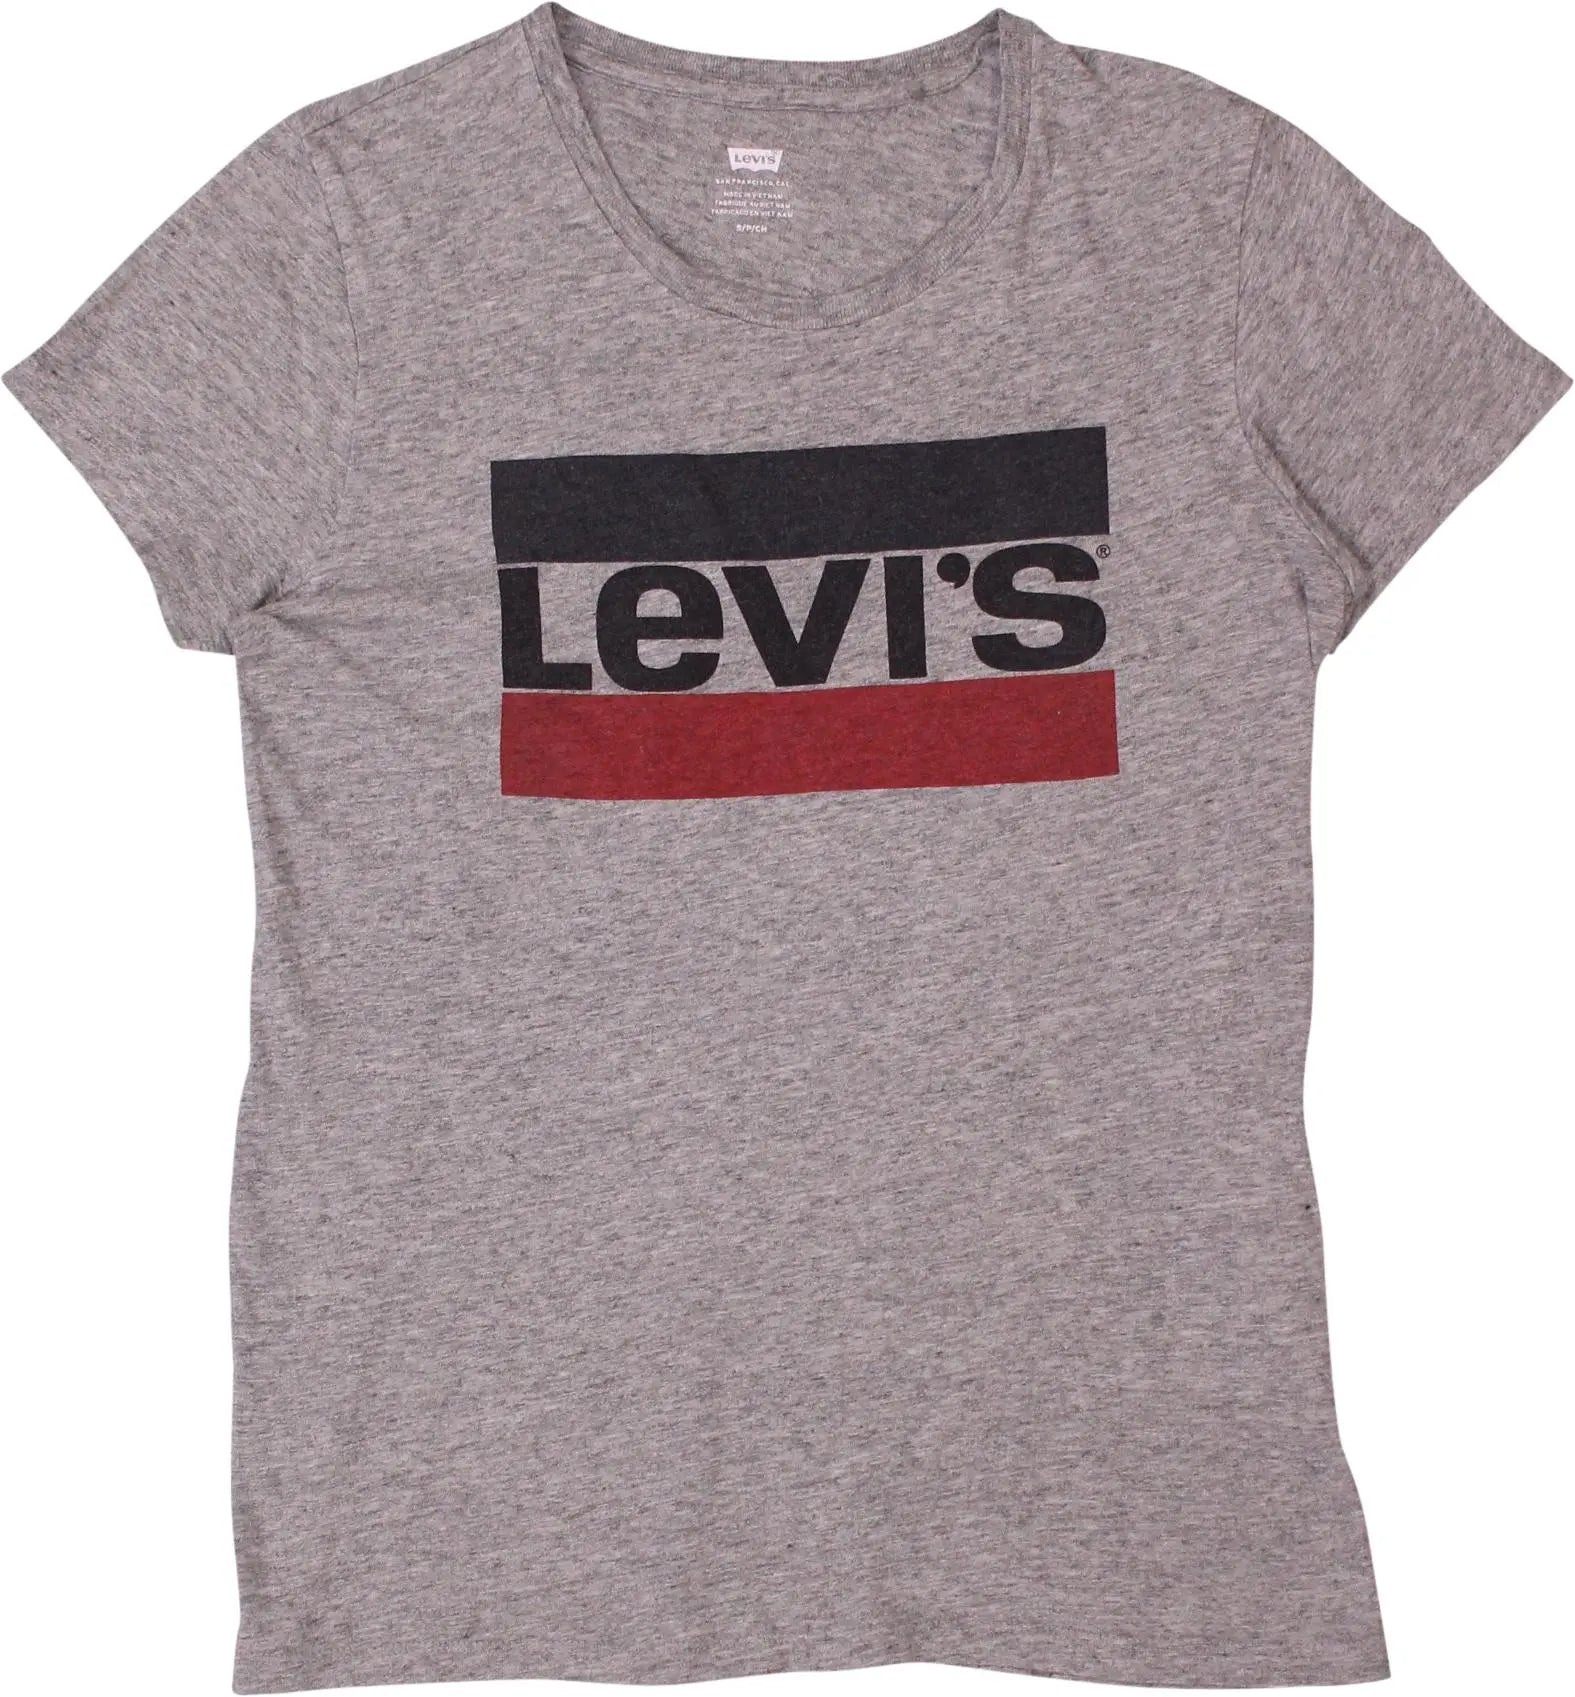 Levi's - Grey T-shirt by Levi's- ThriftTale.com - Vintage and second handclothing